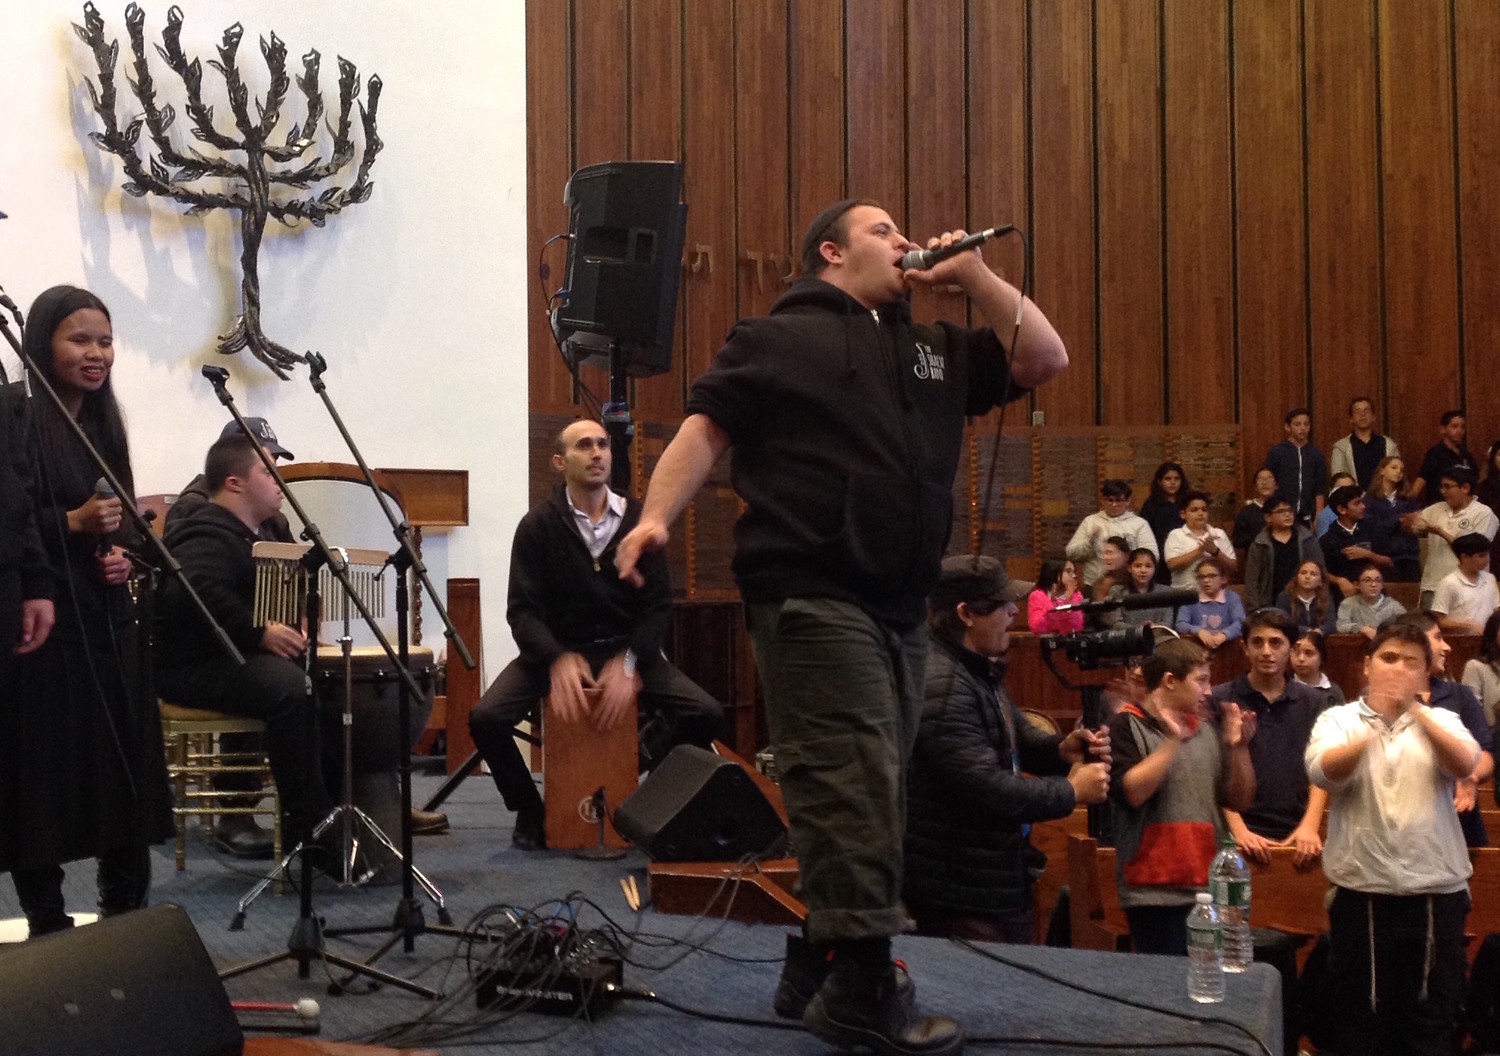 Yair Pomburg raps during a performance of the Shalva Band at the North Shore Hebrew Academy in Great Neck.